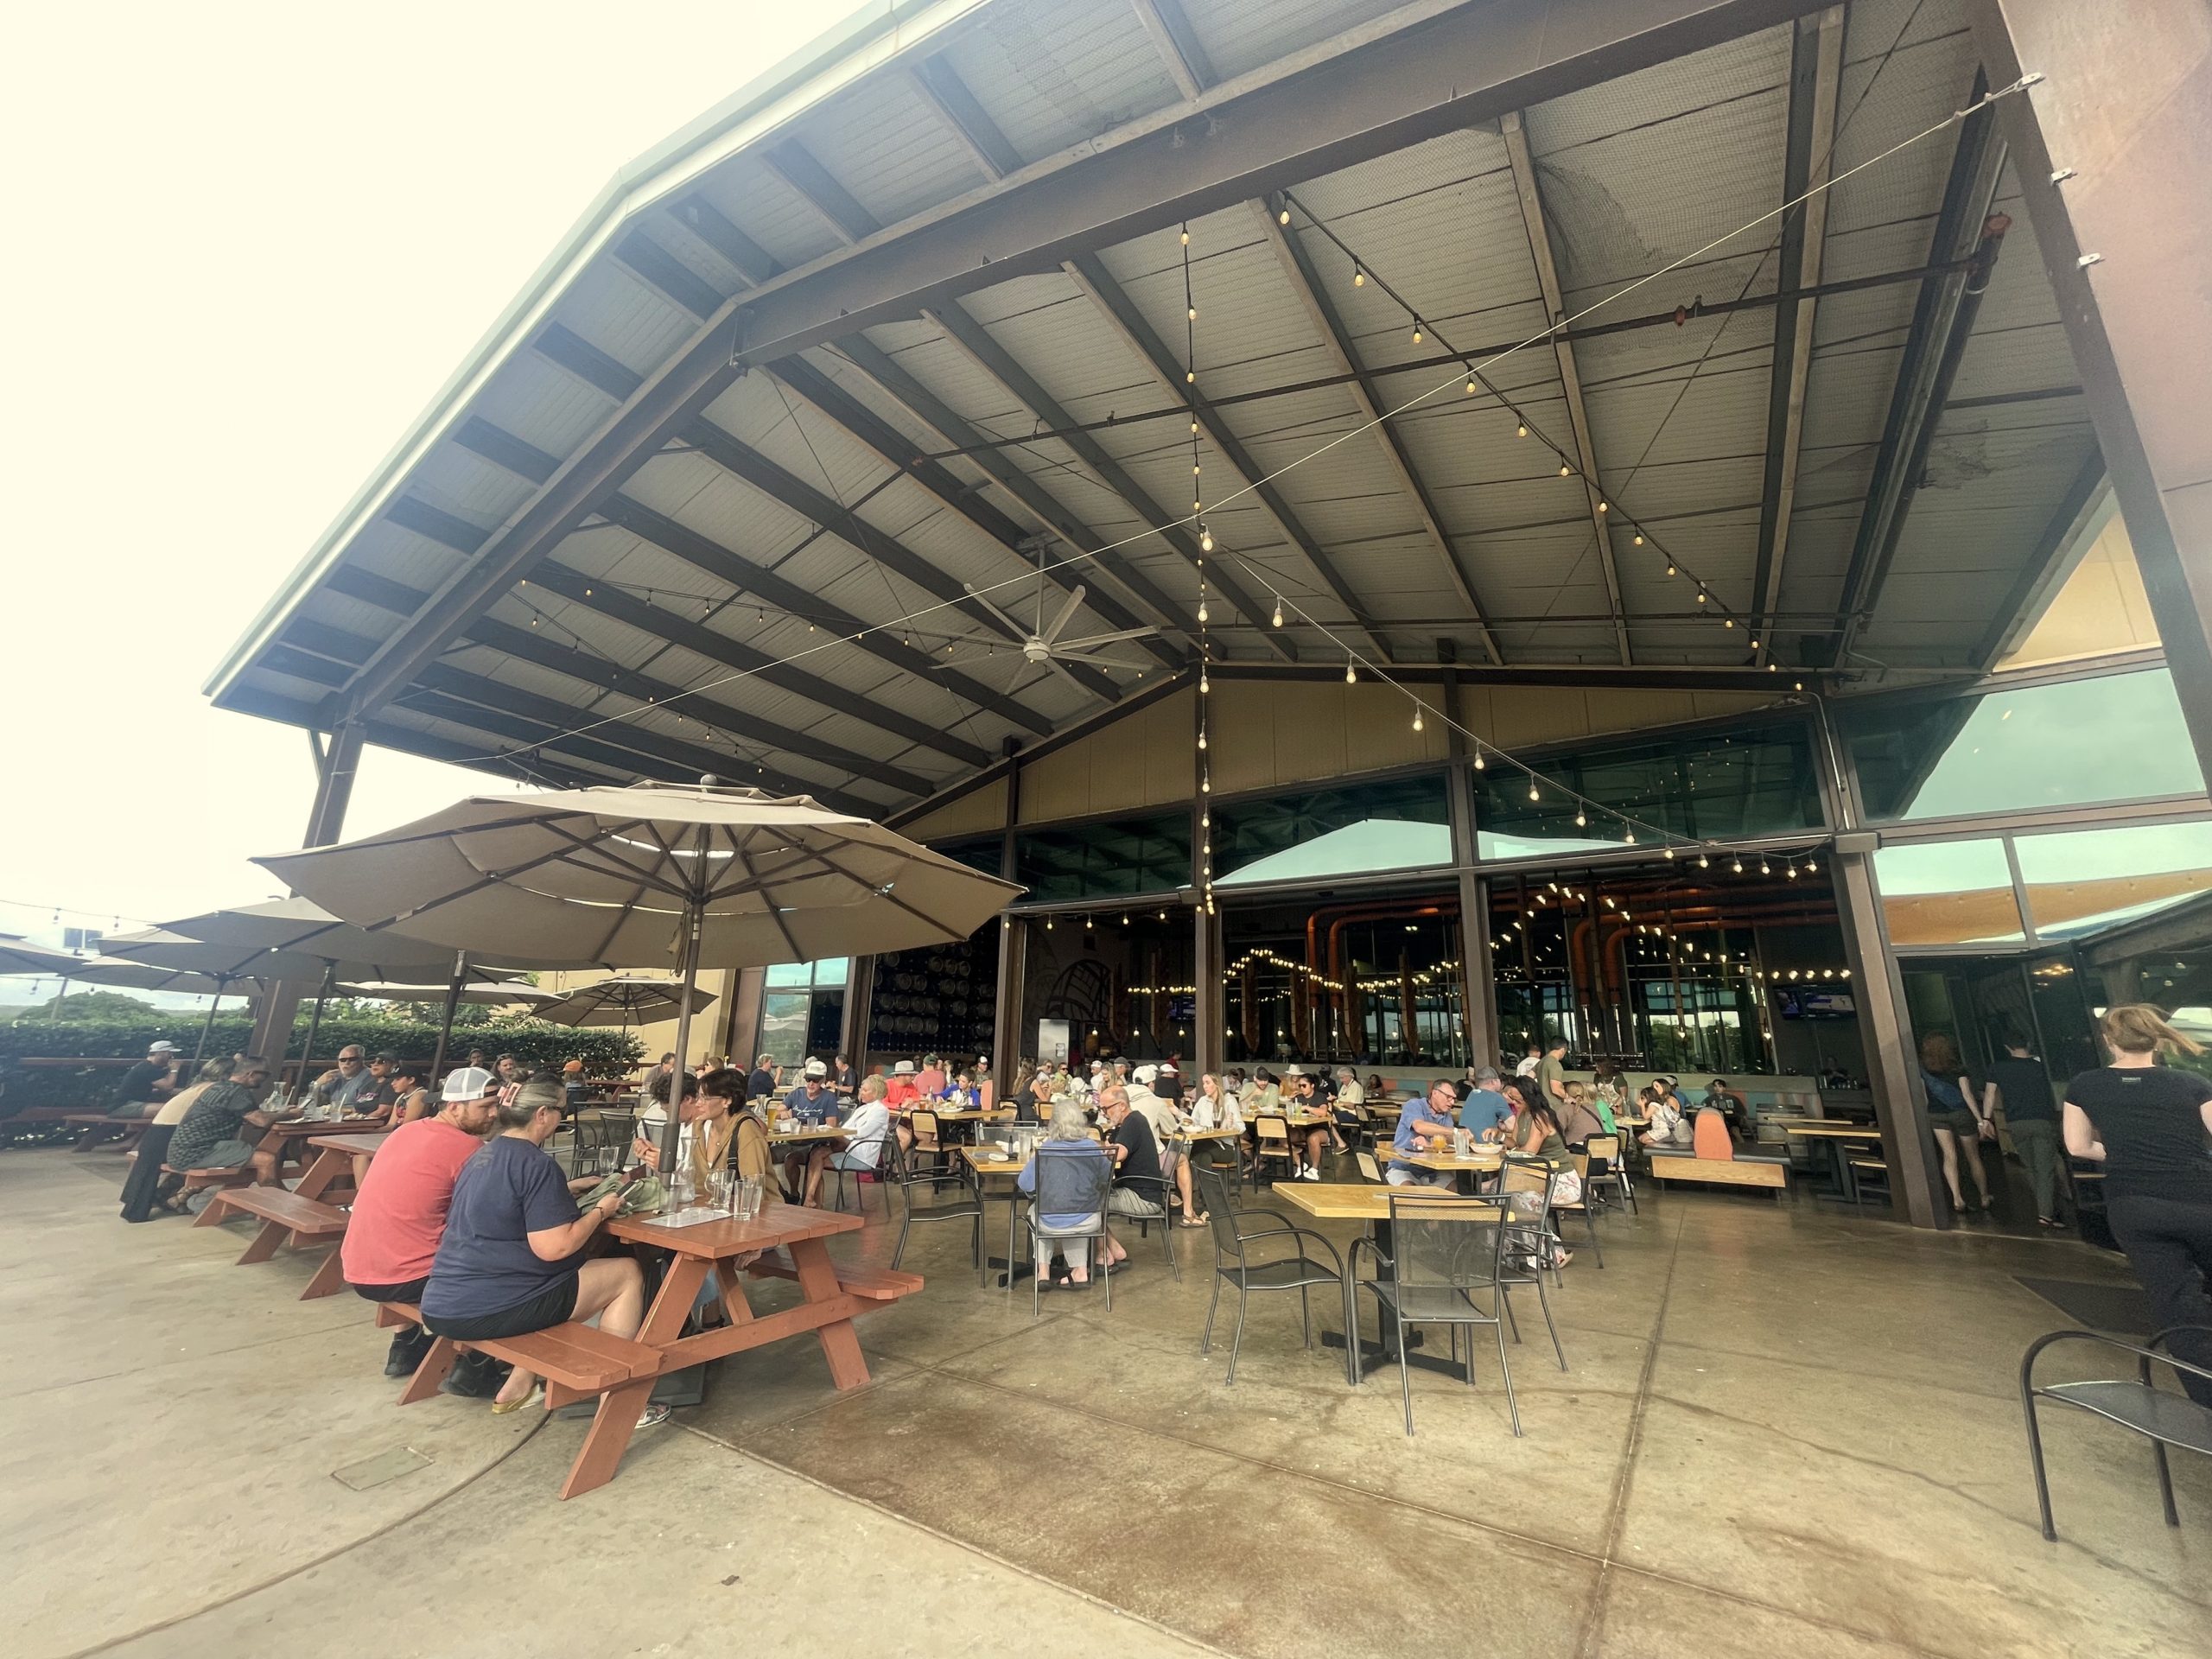 Maui Brewing Co. Beer Garden Covered